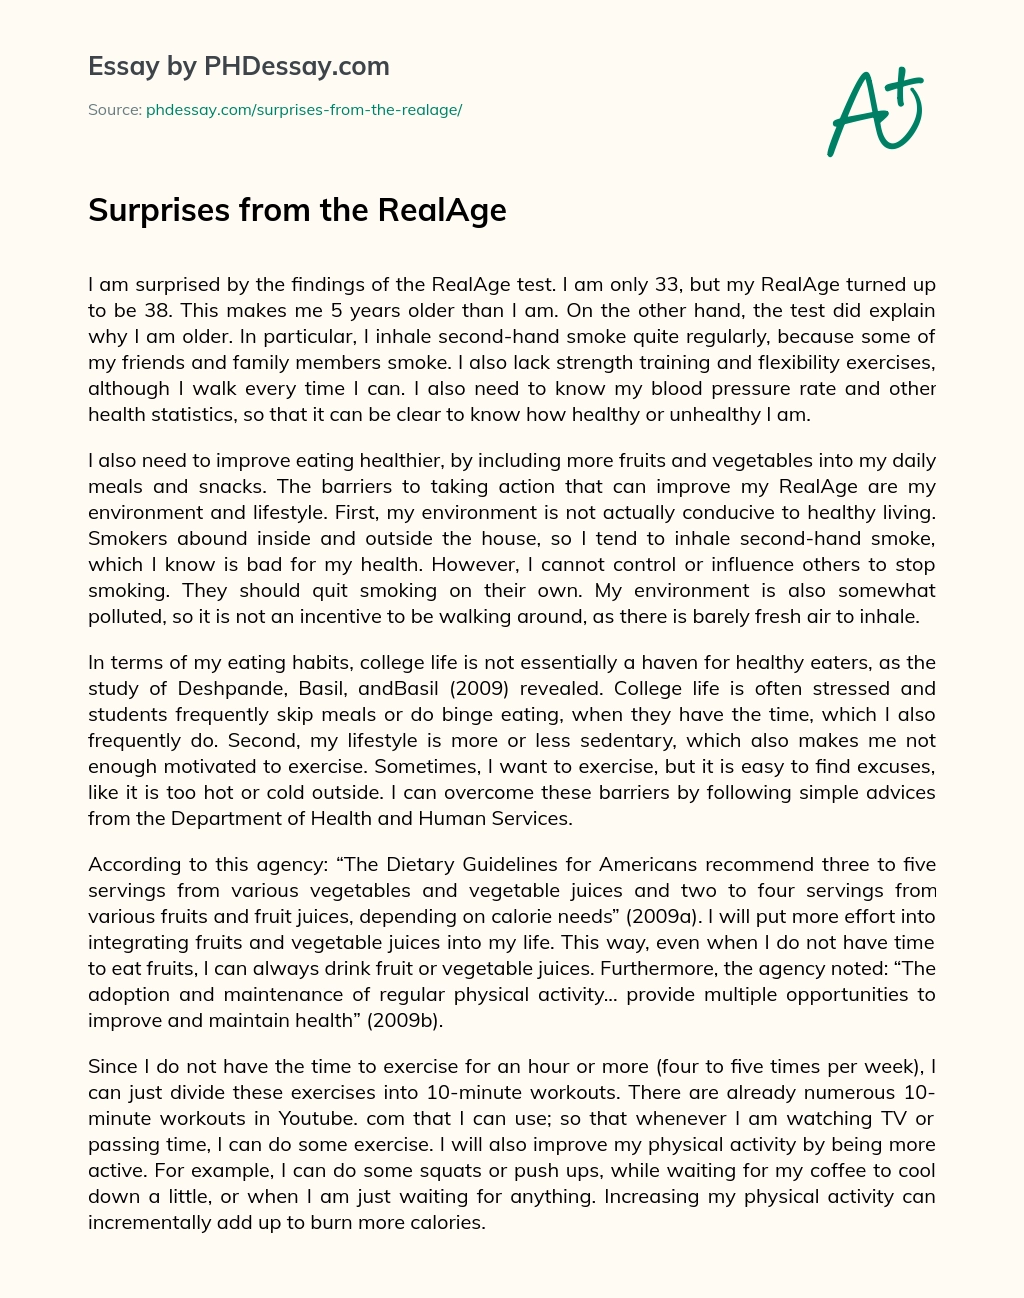 Surprises from the RealAge essay